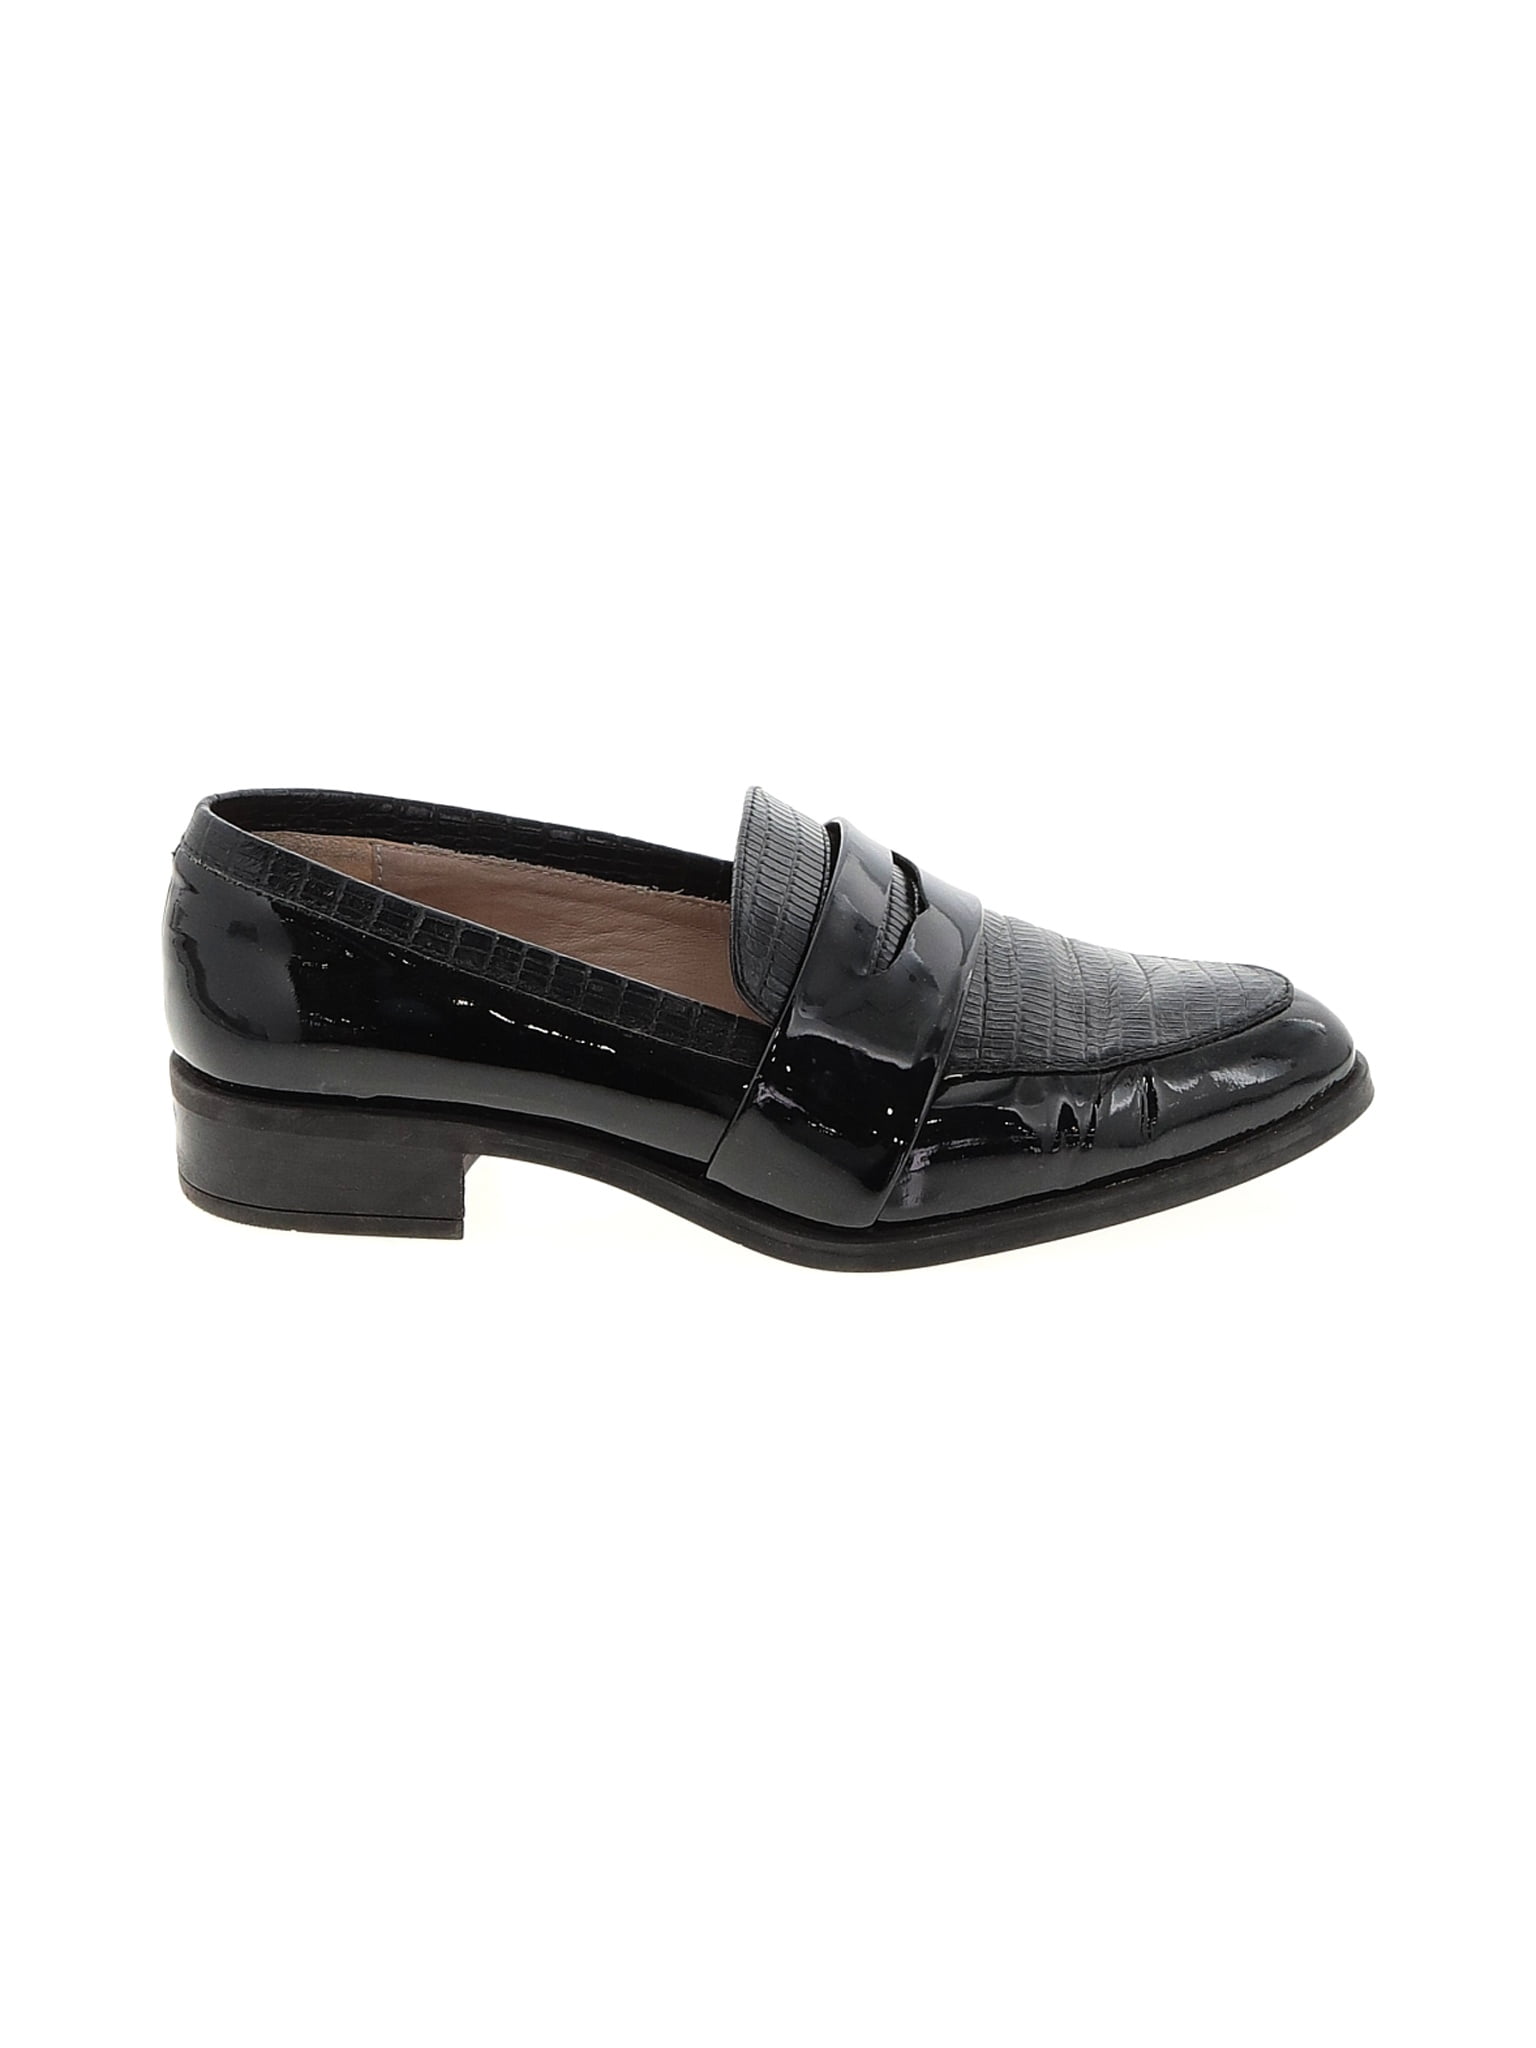 - Pre-Owned Unisa Women's Size 38 Flats -